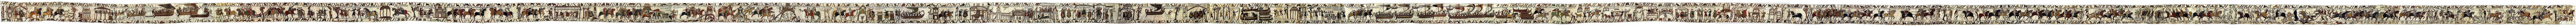 An extremely long embroidered cloth depicting events leading to the Norman conquest of England.